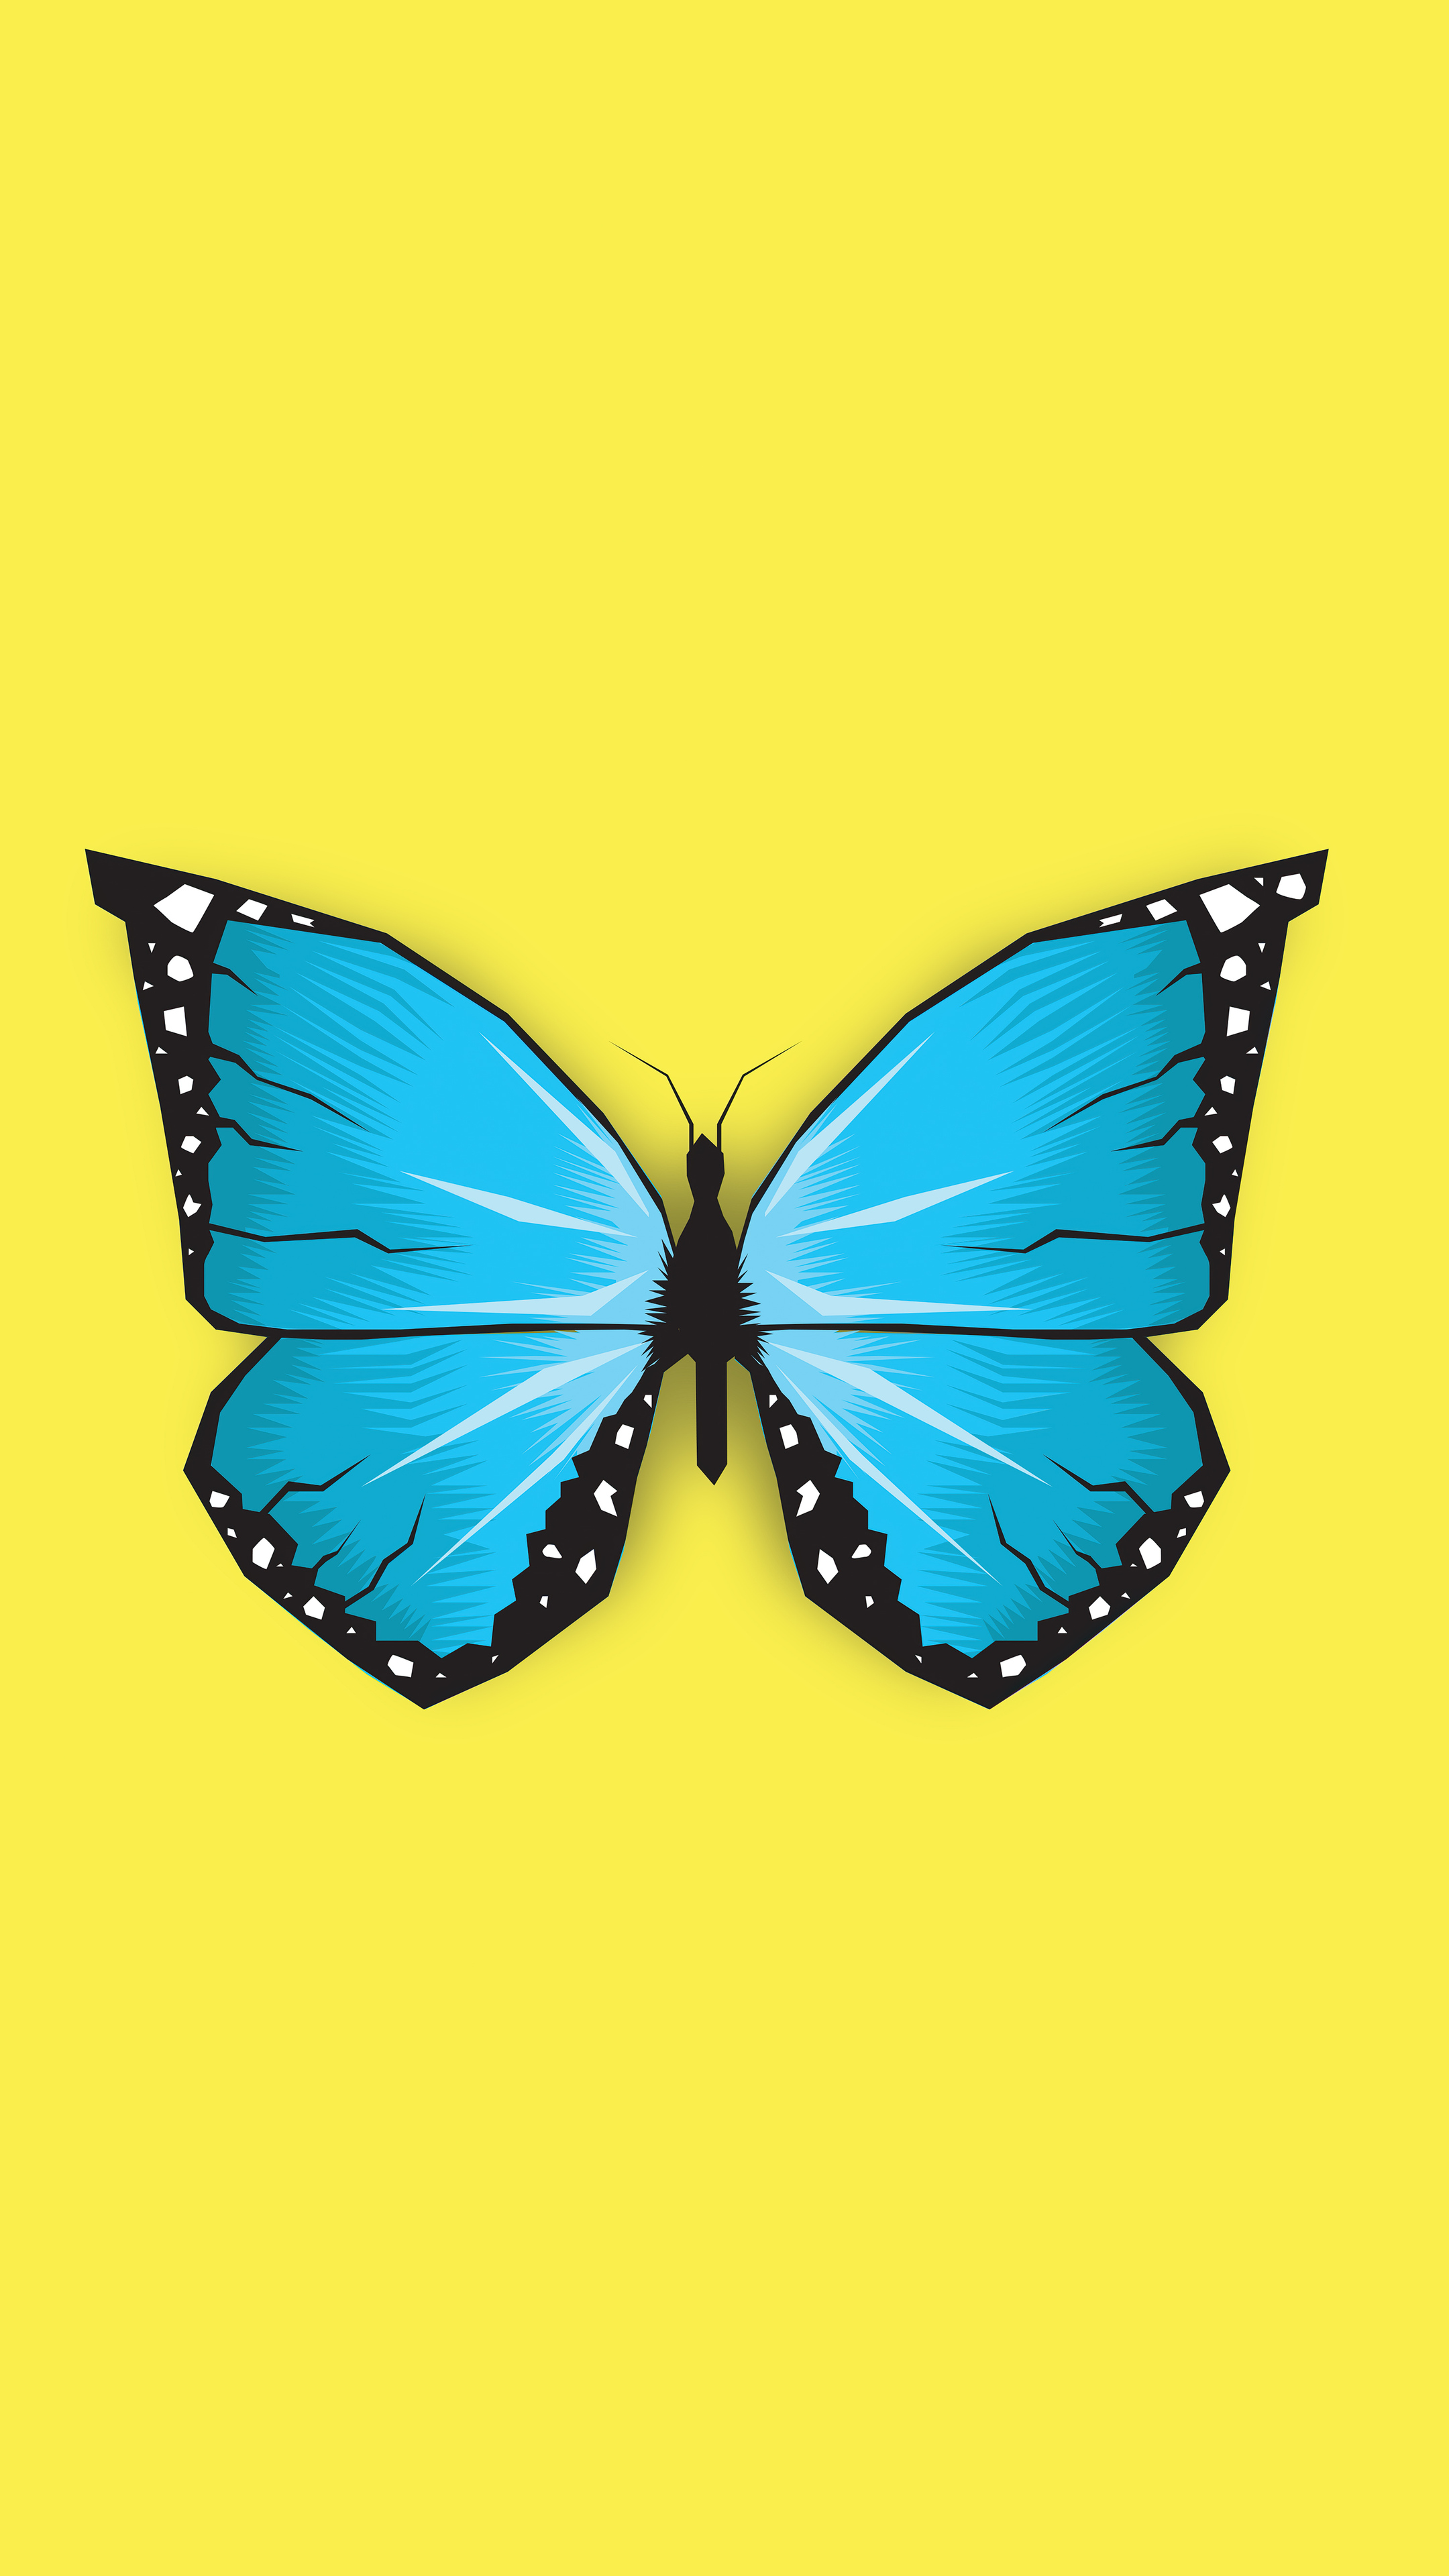 A blue butterfly on yellow background - Butterfly